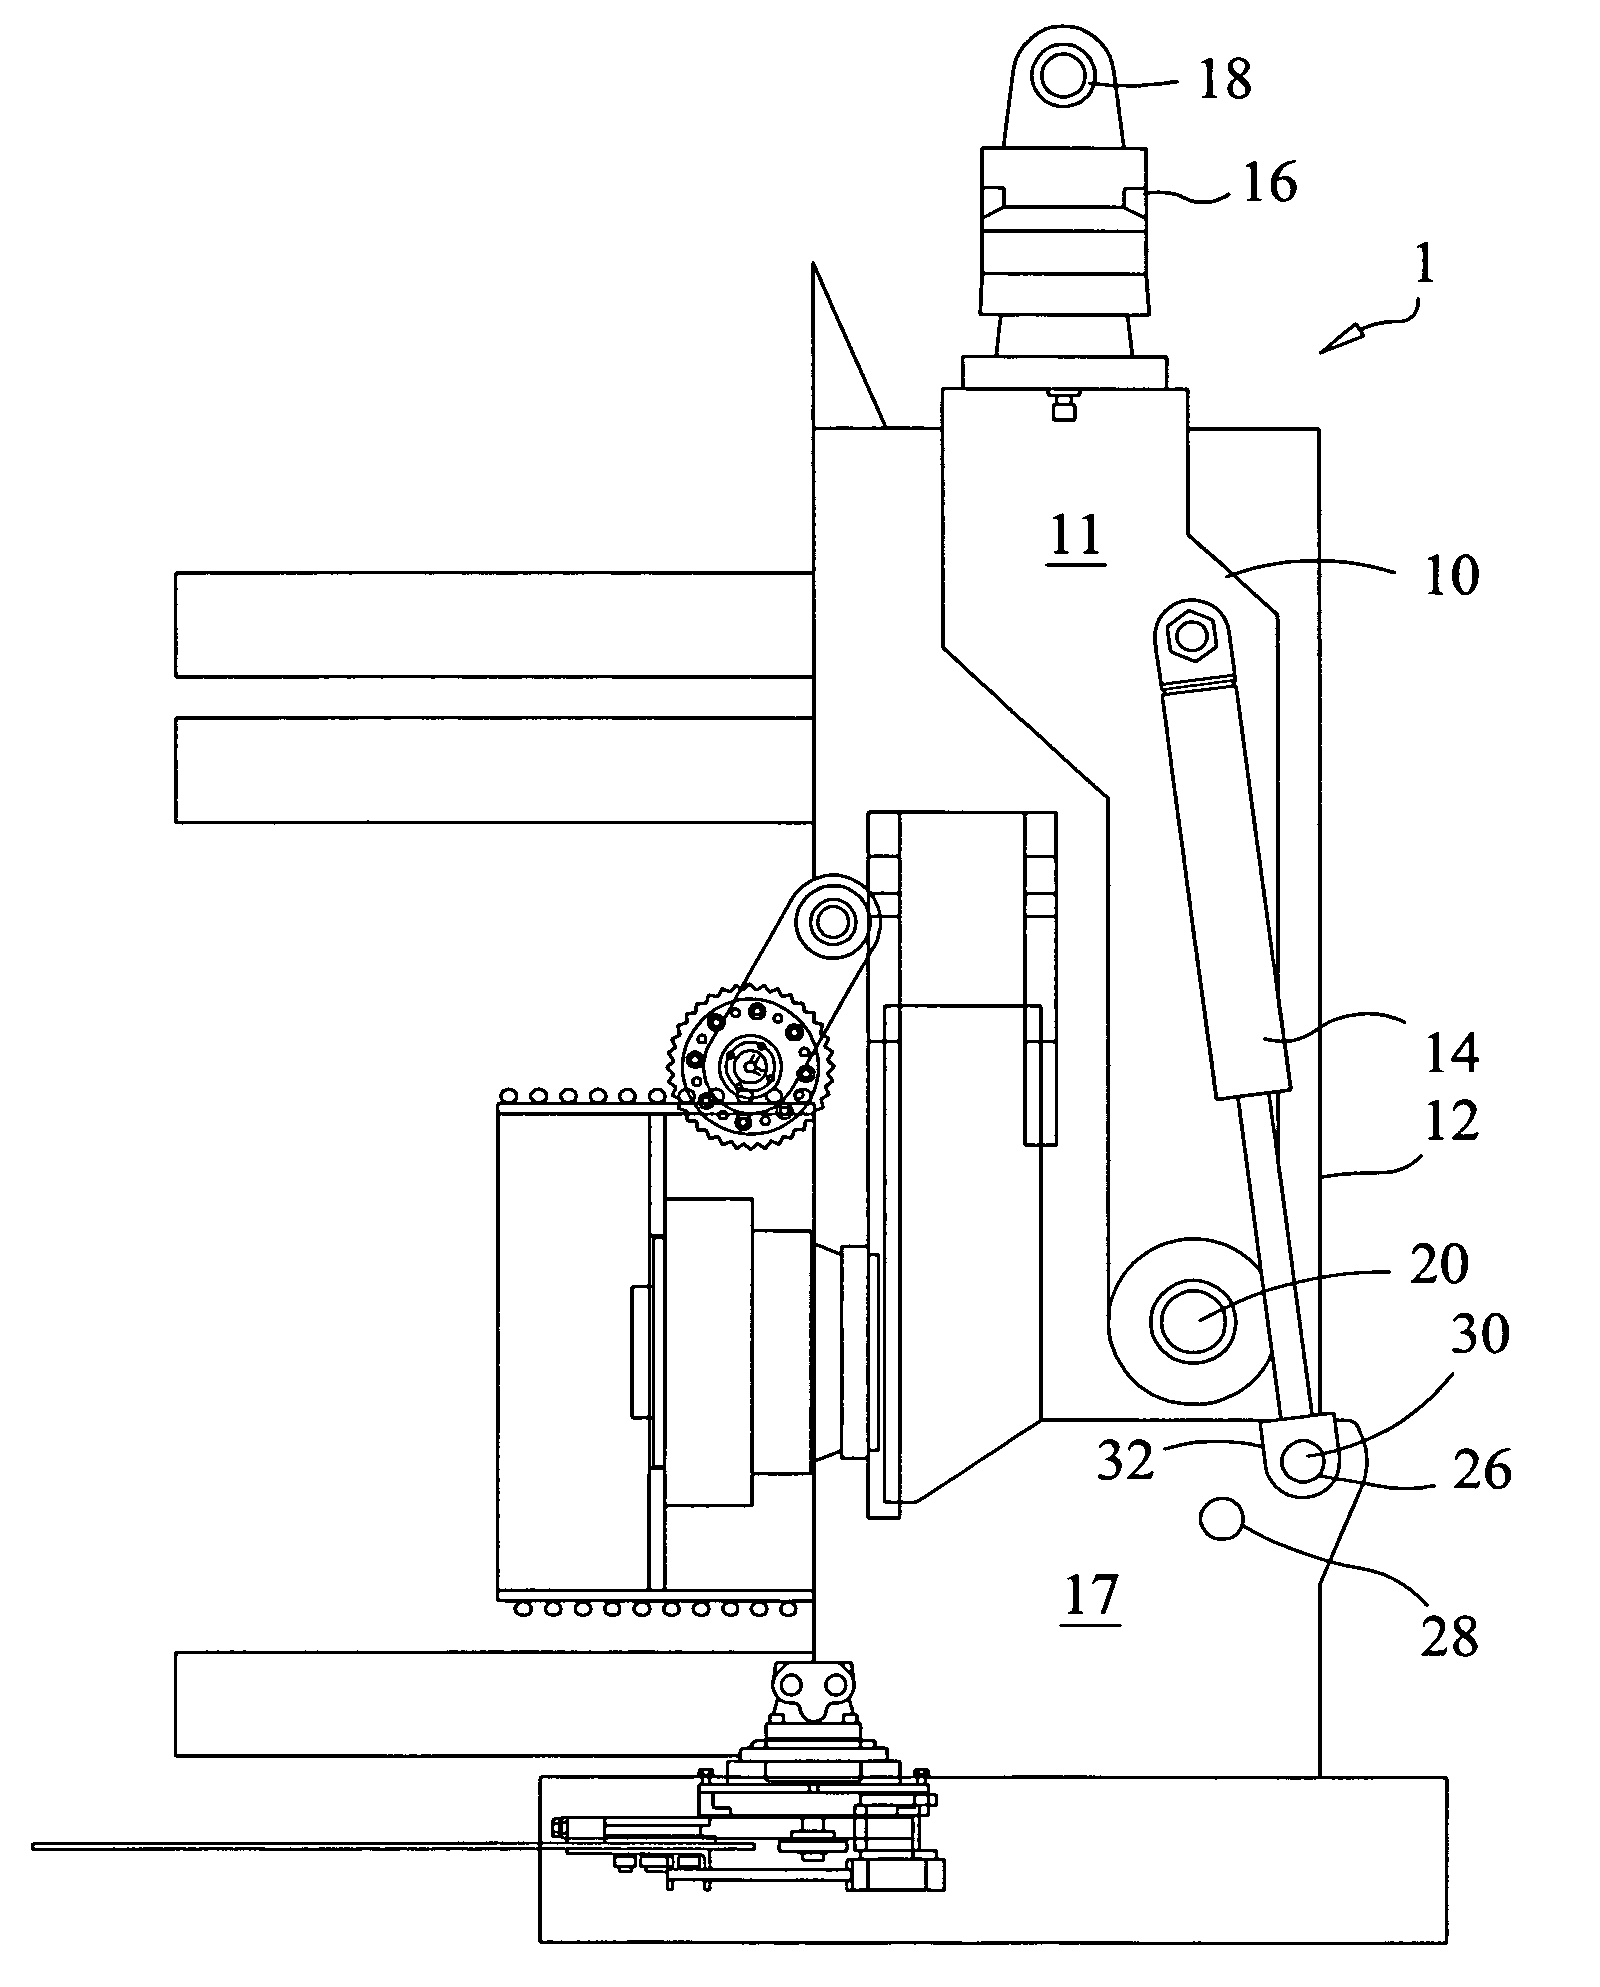 Tree processing equipment with two position pivot point for actuator ends